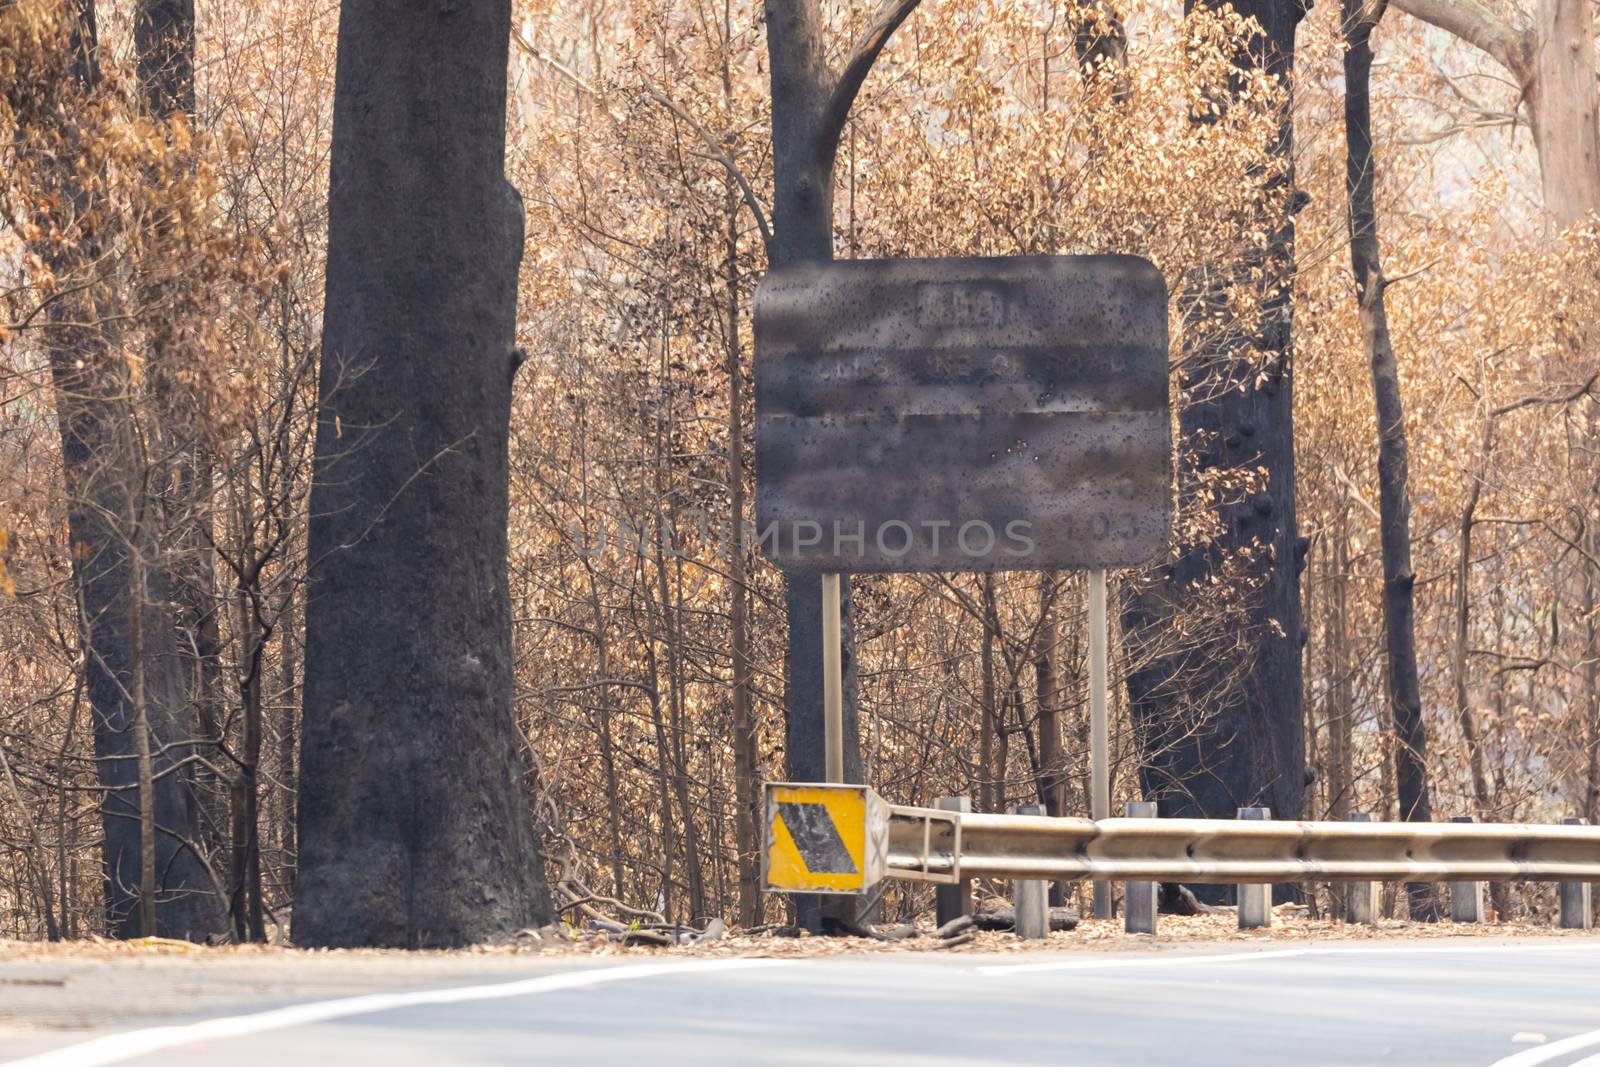 A burnt sign on a road surrounded by burnt gum trees due to bushfire in The Blue Mountains in regional Australia by WittkePhotos